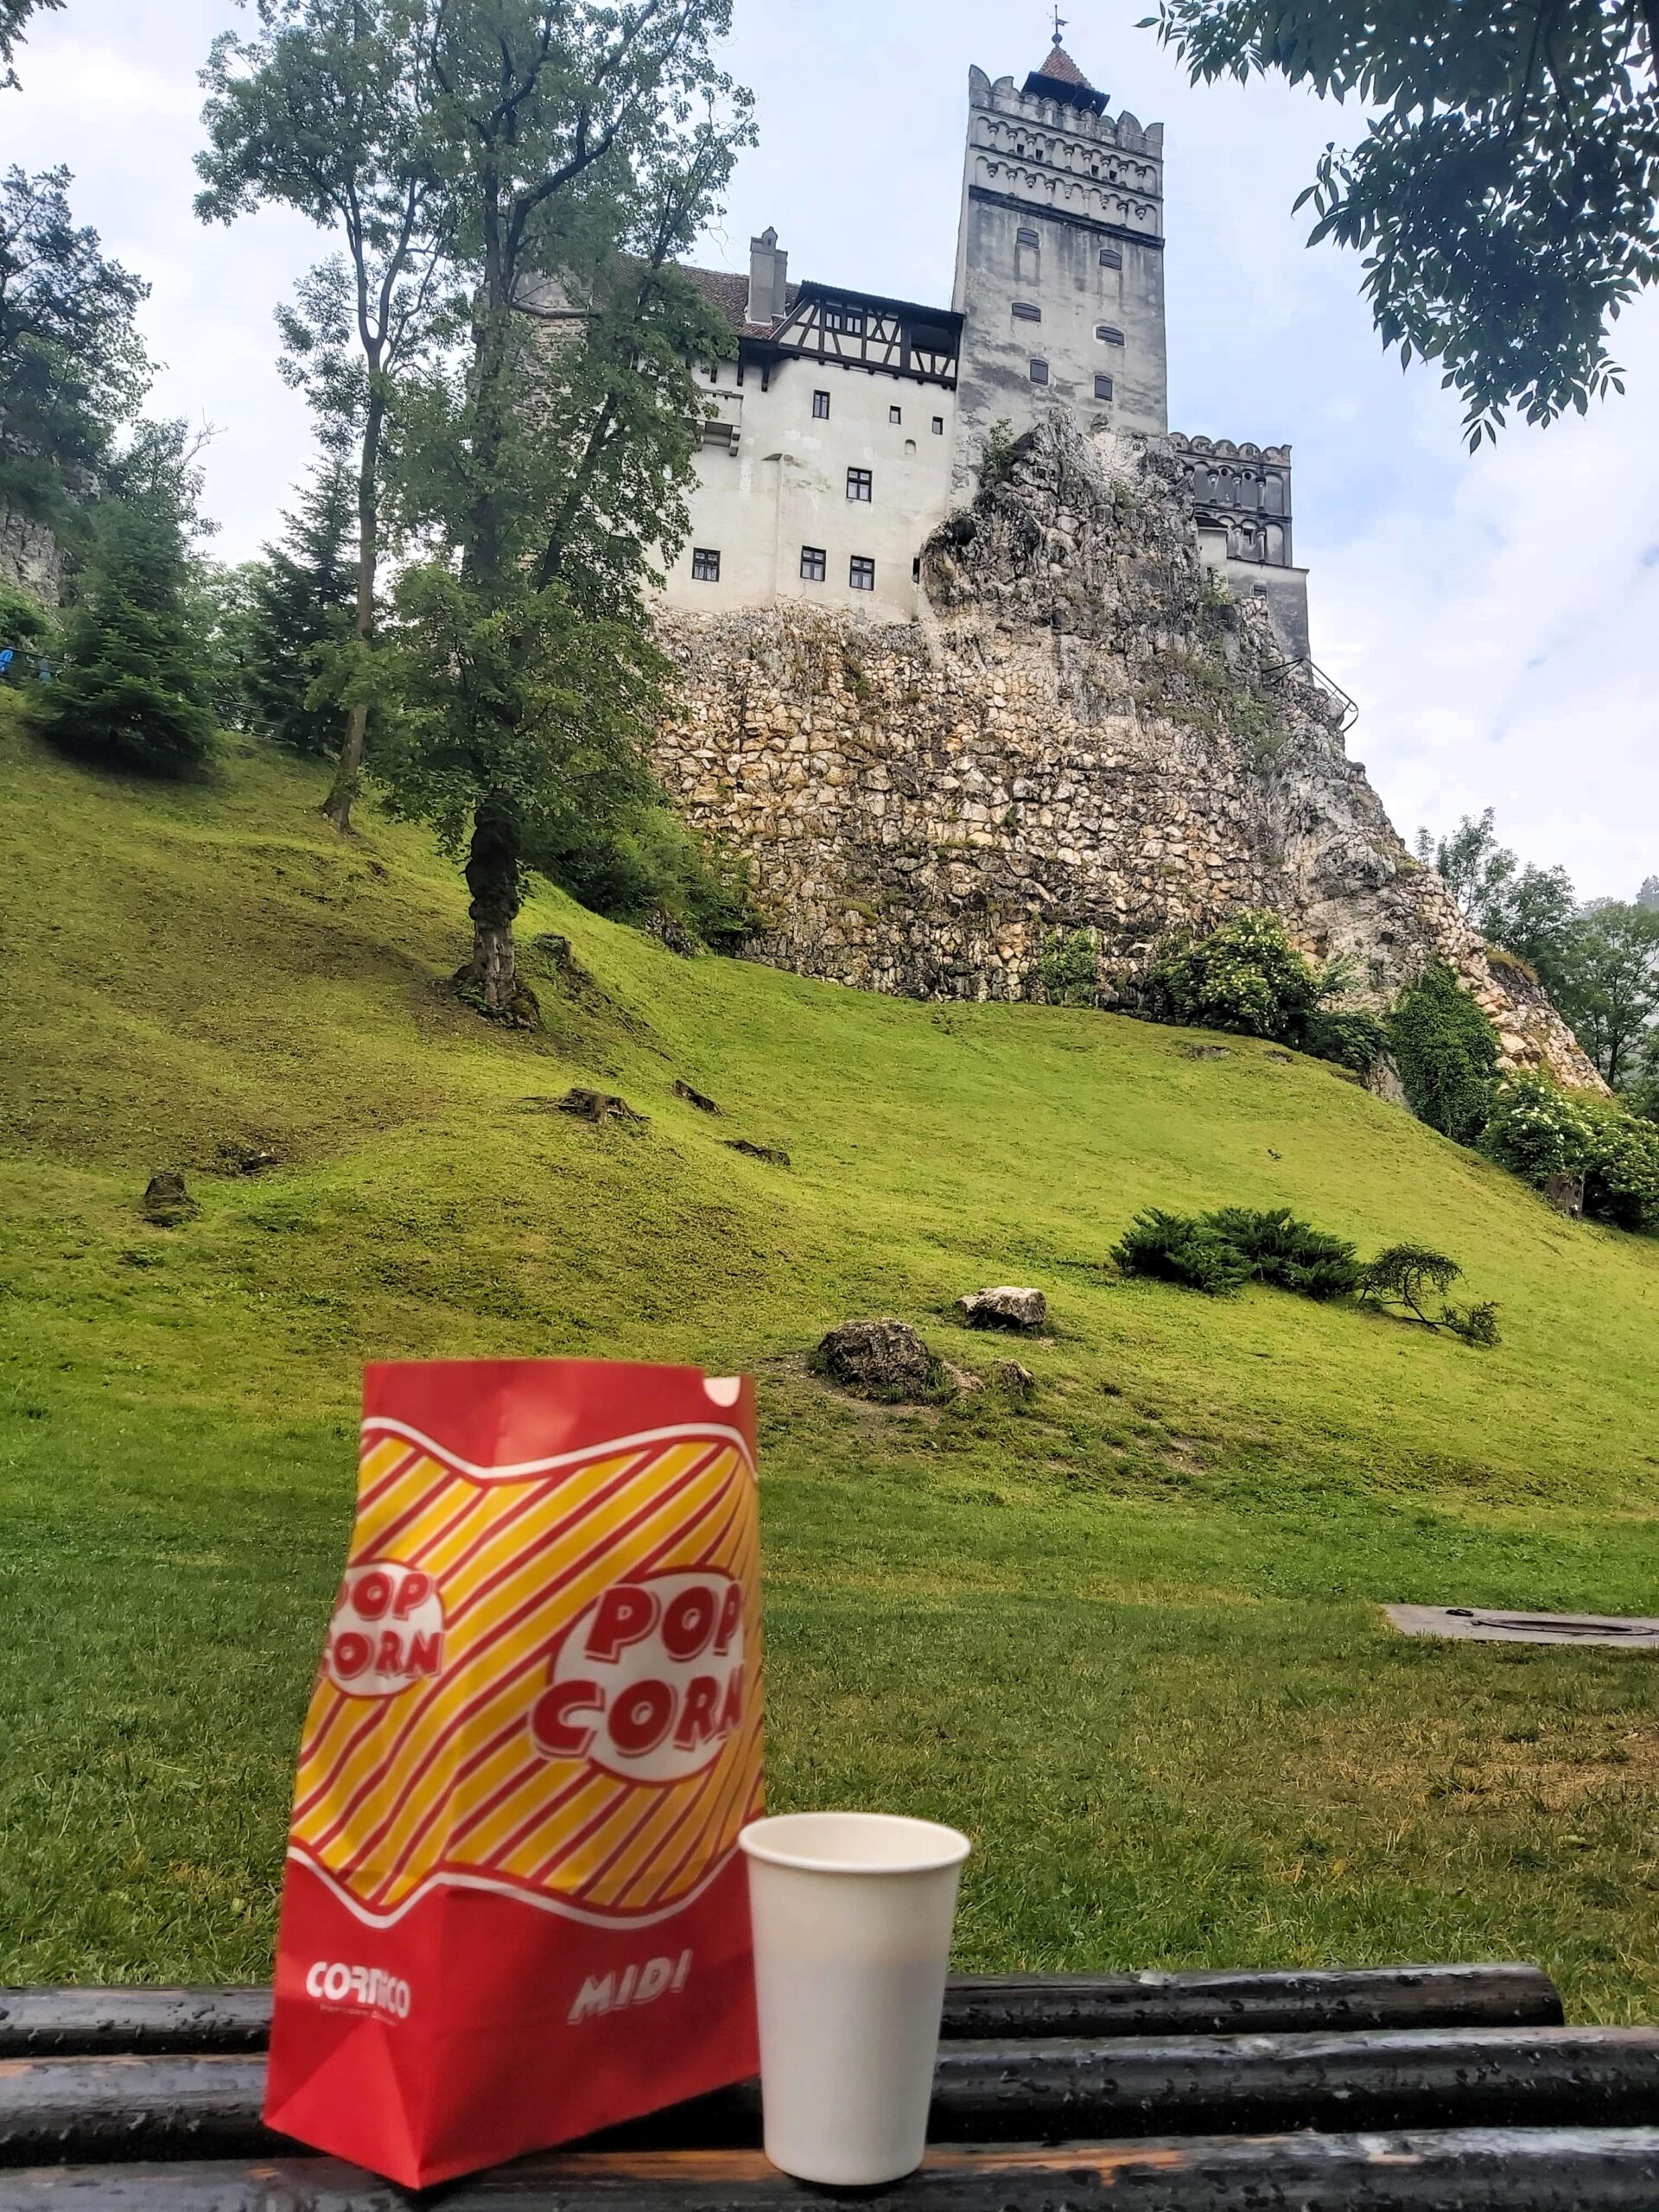 A view of Bran Castle, Romania, with a red and yellow popcorn bag and cup of coffee in front.